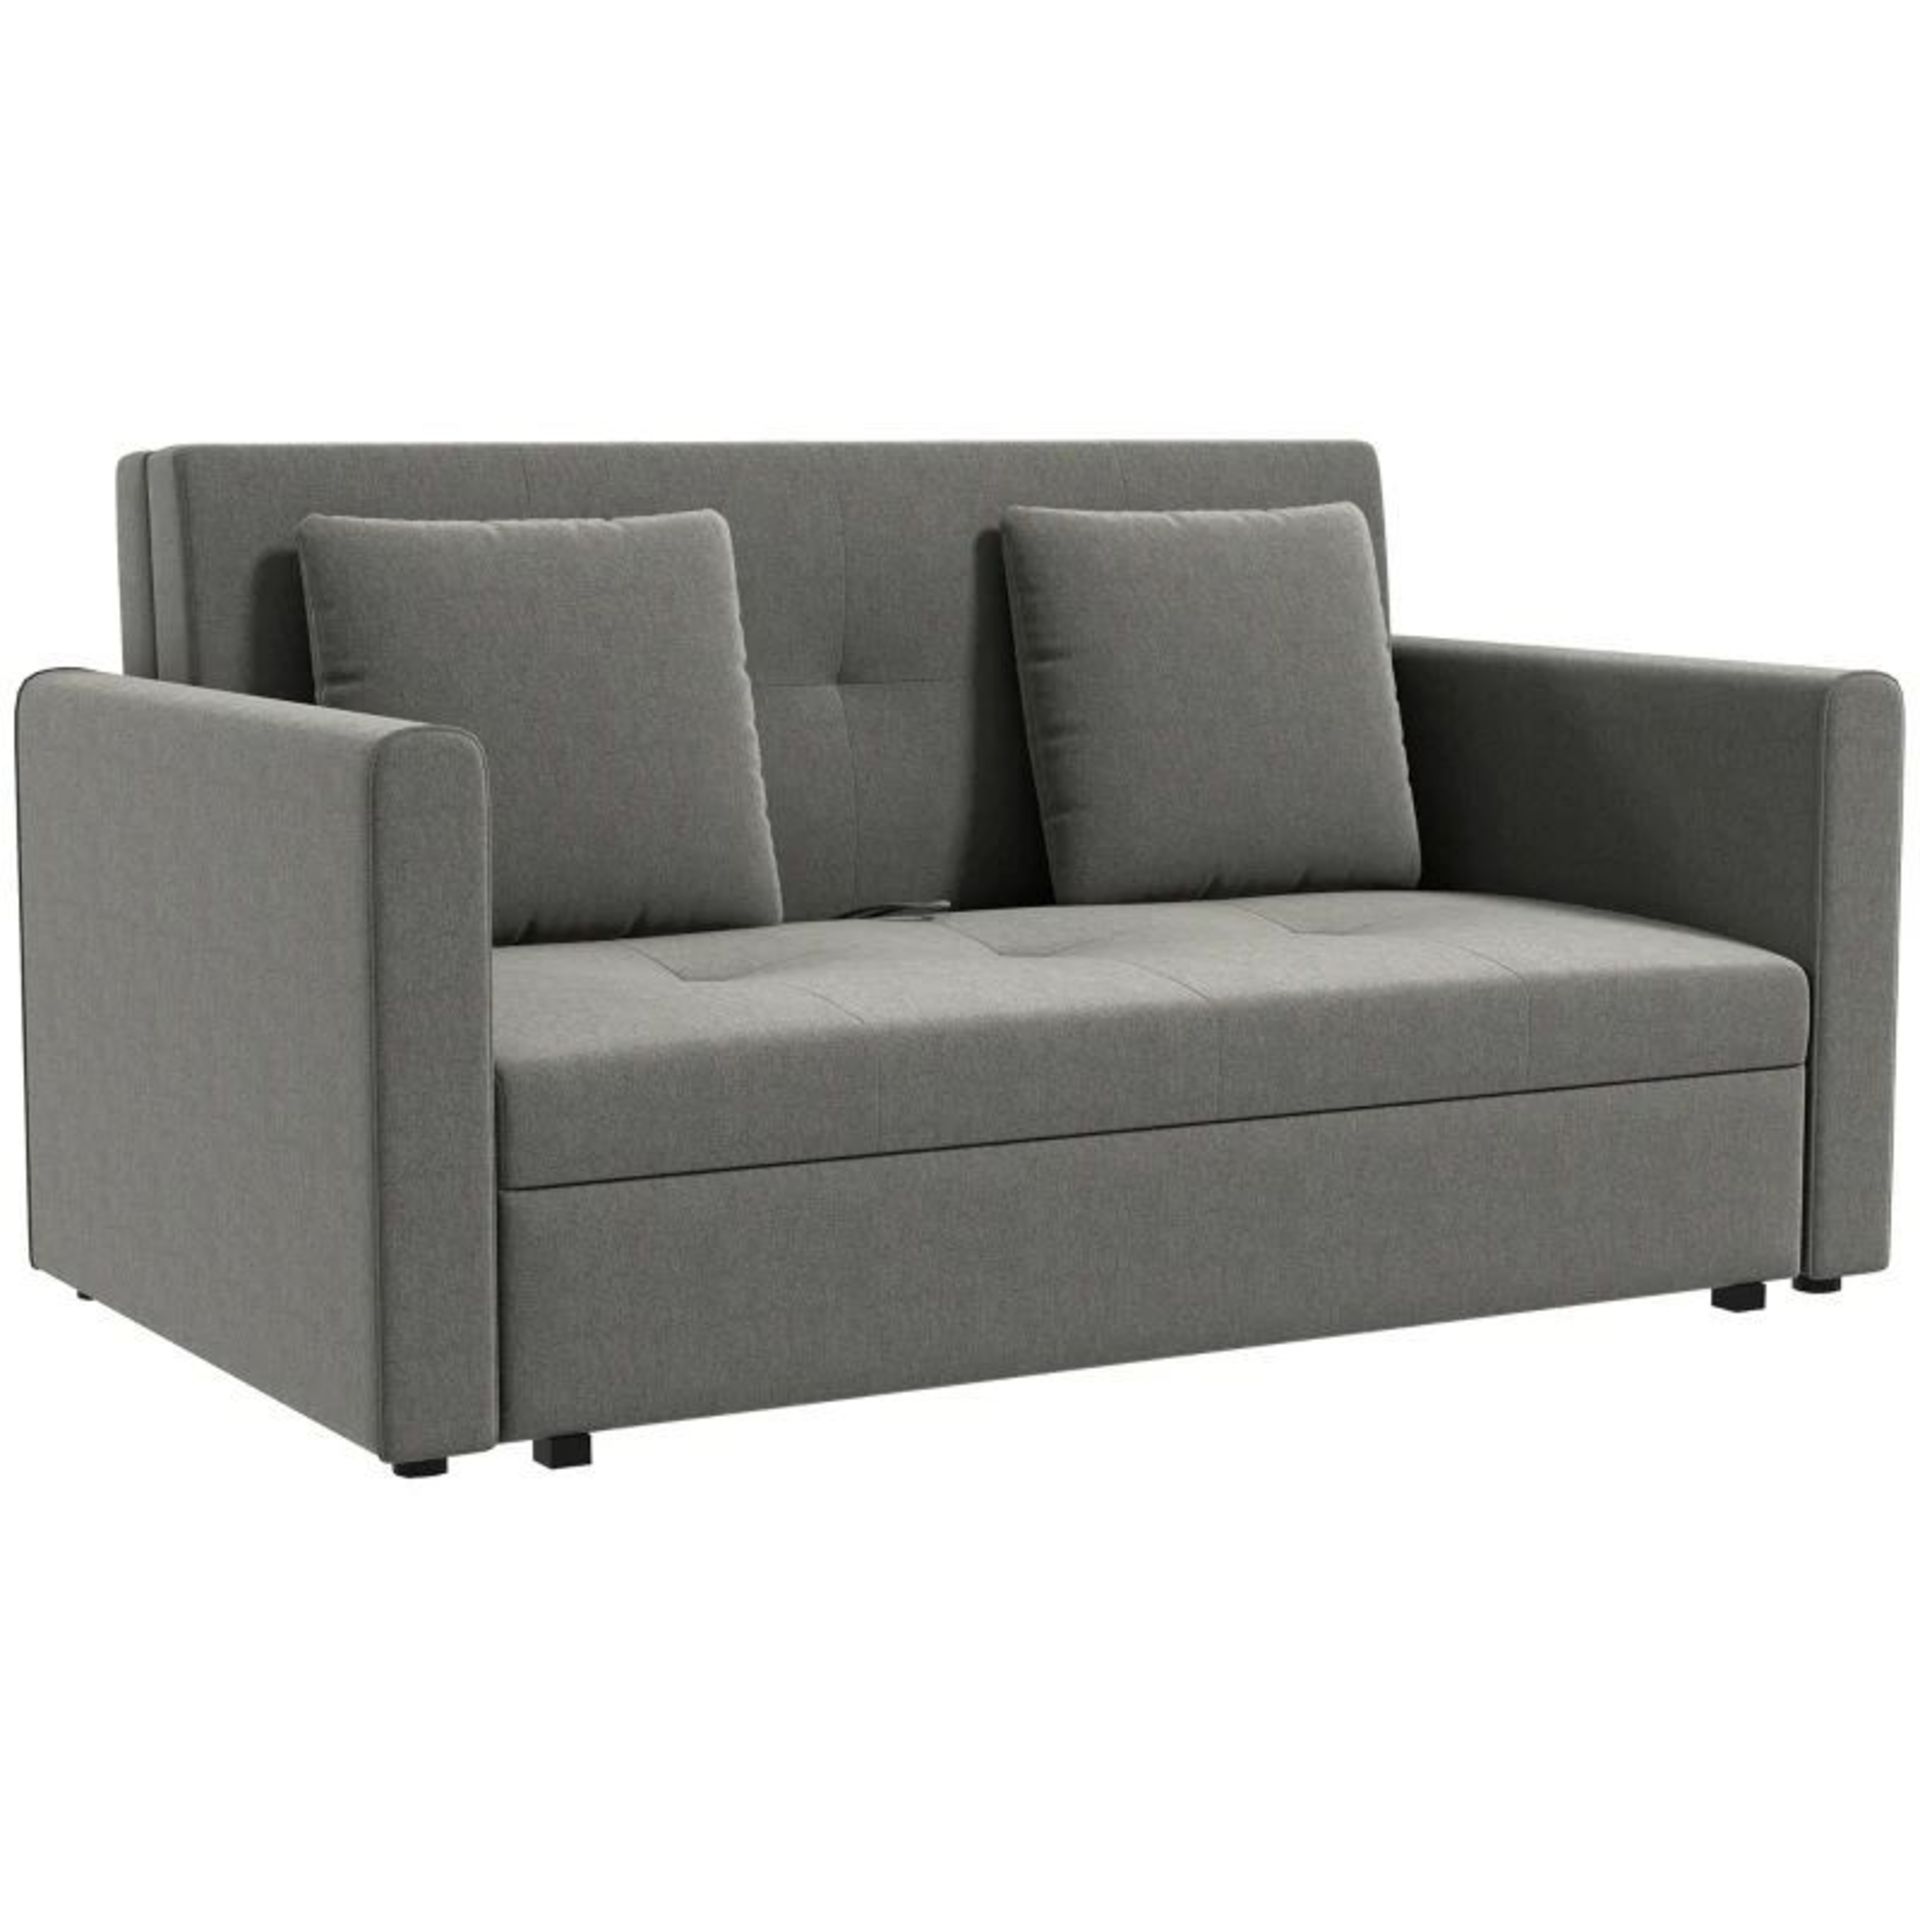 HOMCOM 2 Seater Sofa Bed, Convertible Bed Settee, Modern Fabric Loveseat Sofa Couch with 2 Cushions, - Image 3 of 4